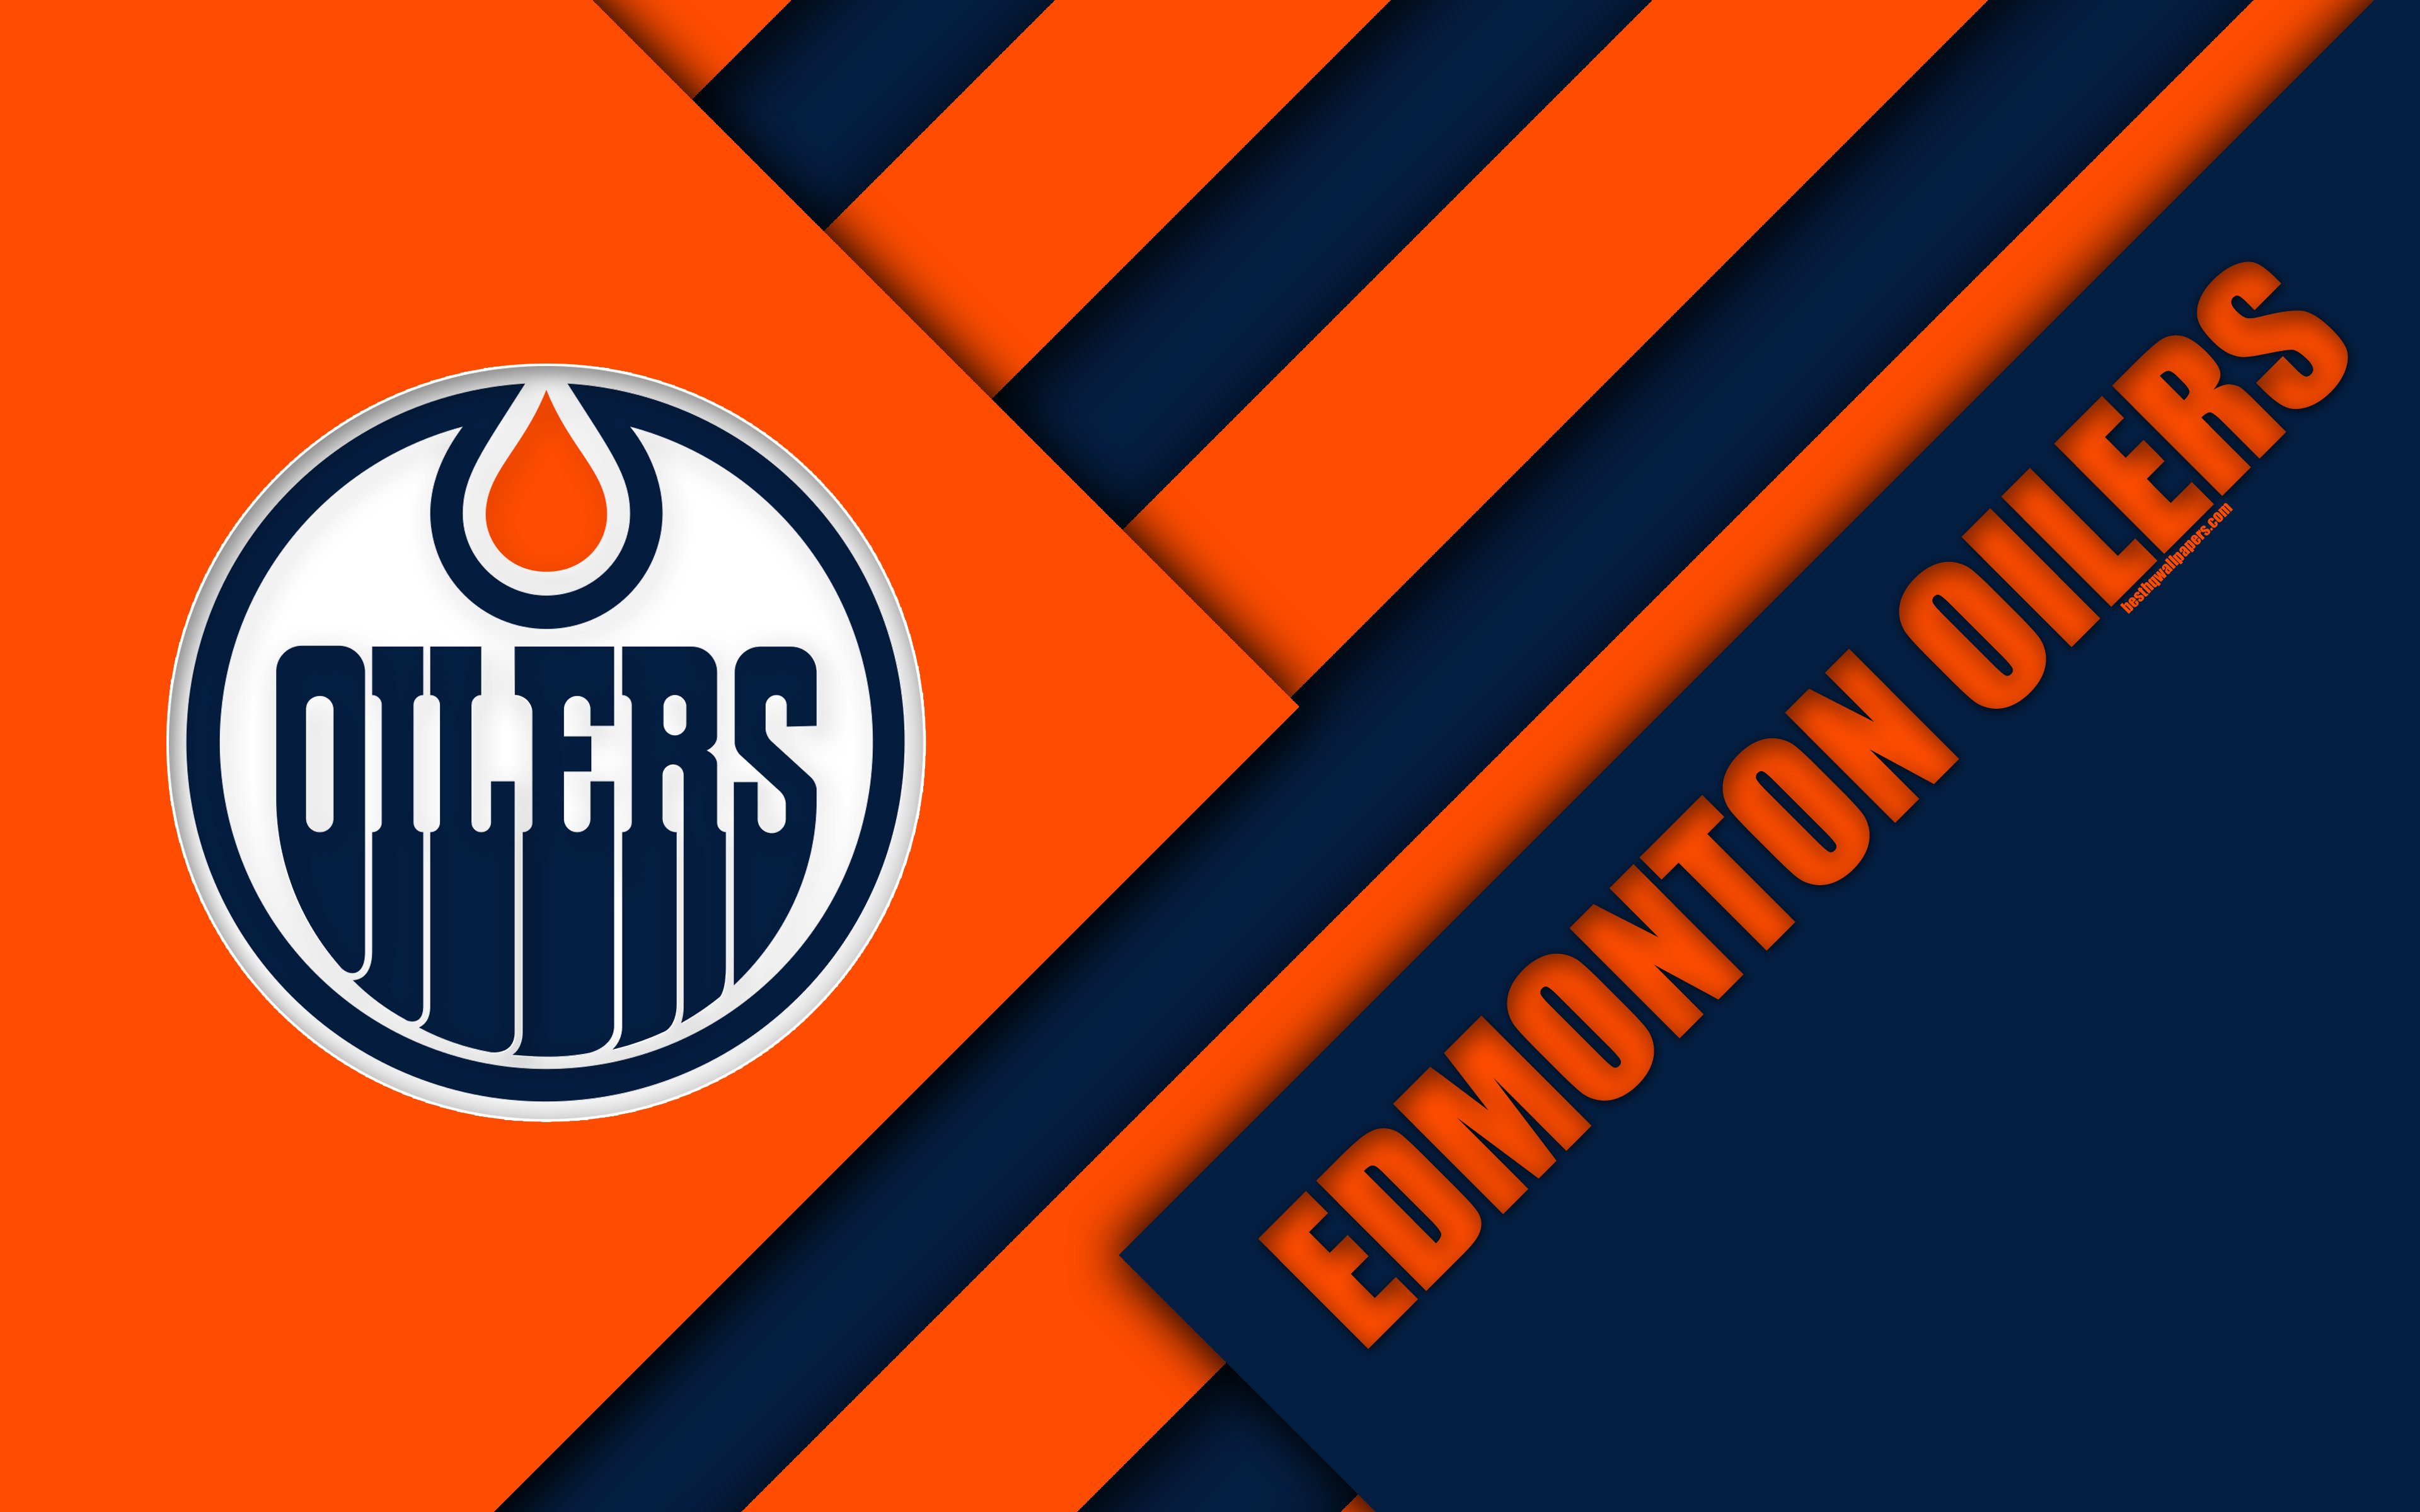 Download wallpaper Edmonton Oilers, Edmonton, Canada, 4k, material design, logo, NHL, orange blue abstraction, lines, hockey club, USA, National Hockey League for desktop with resolution 3840x2400. High Quality HD picture wallpaper